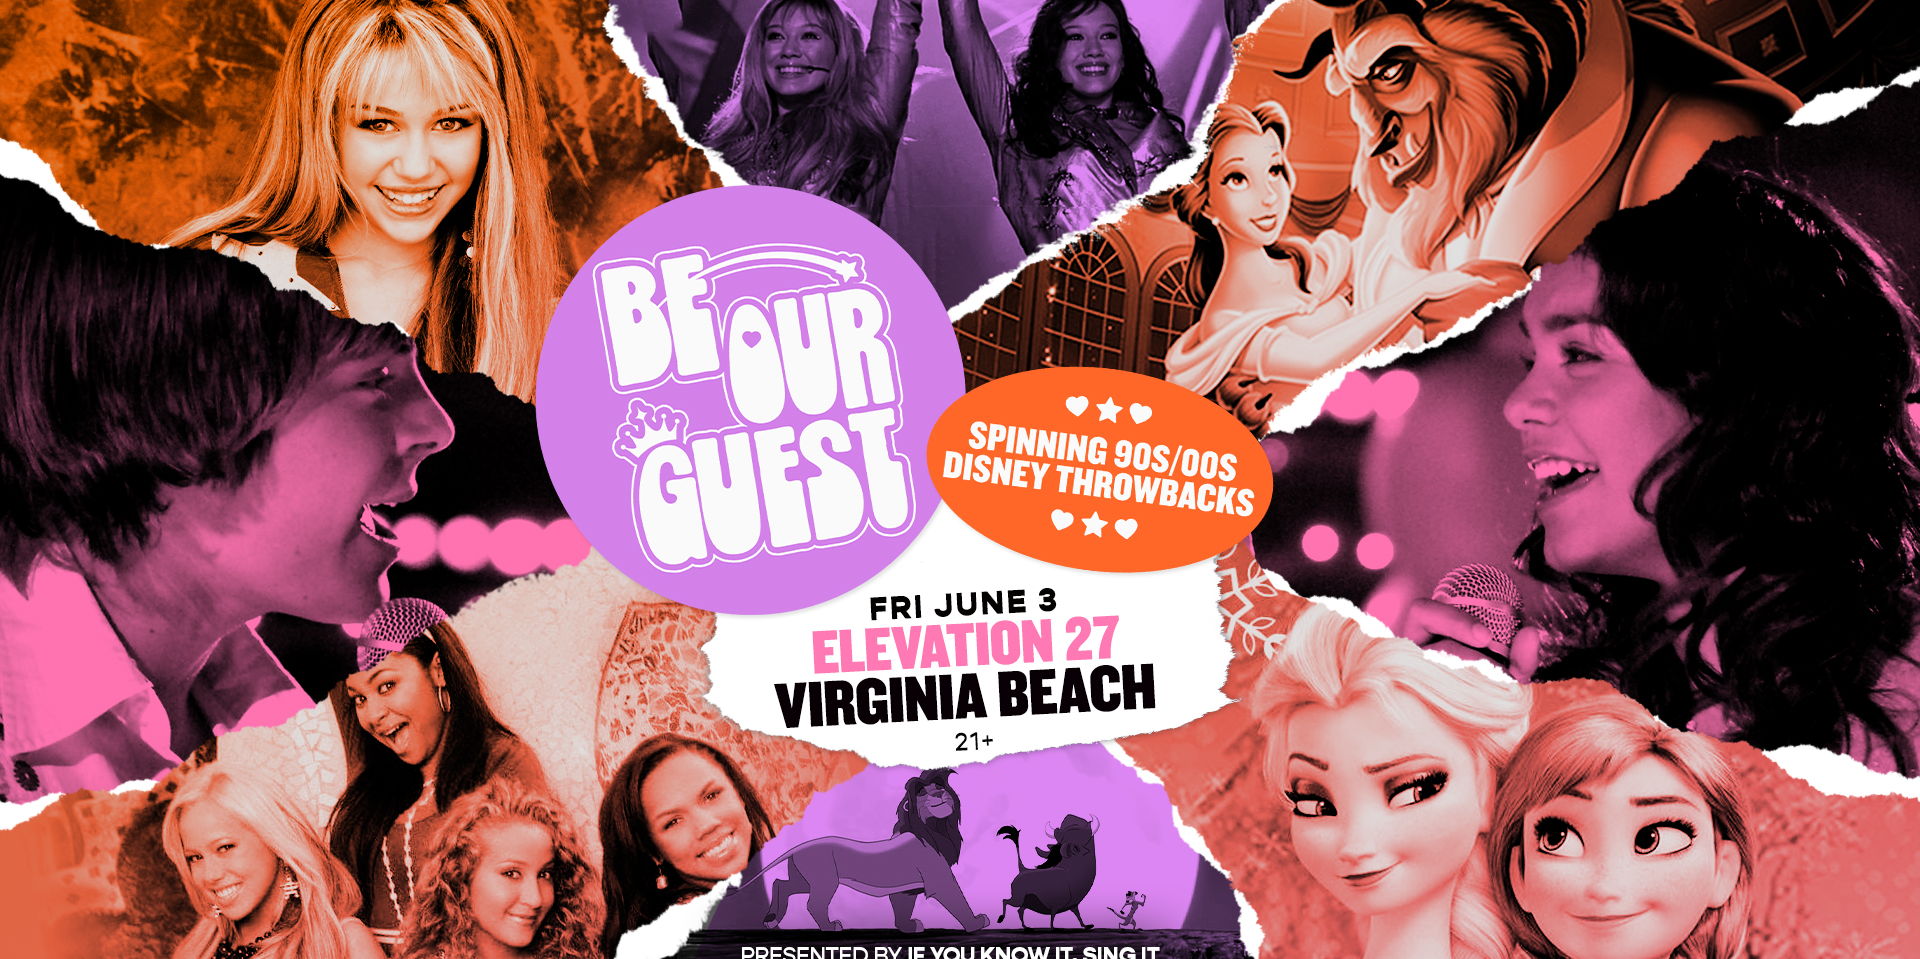 Be Our Guest - A 90's and 00's Disney Throwback Night at Elevation 27 (Ages 21+) promotional image